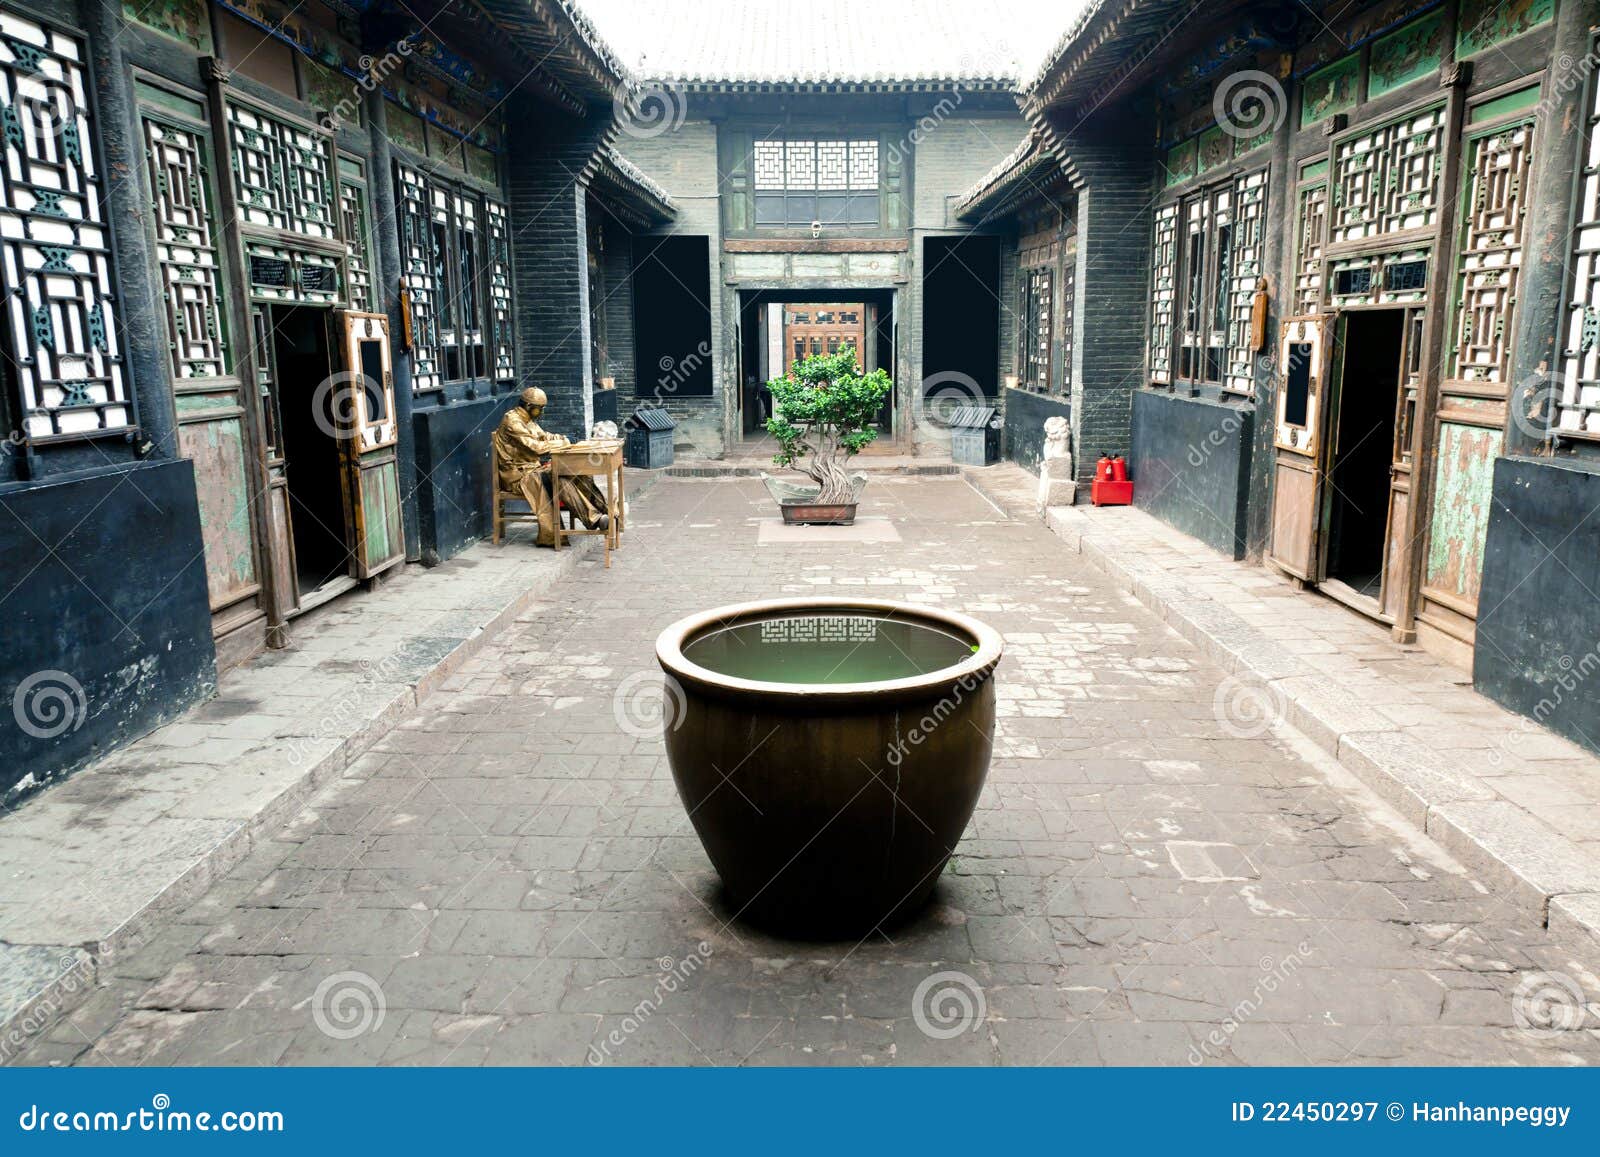 traditional chinese building